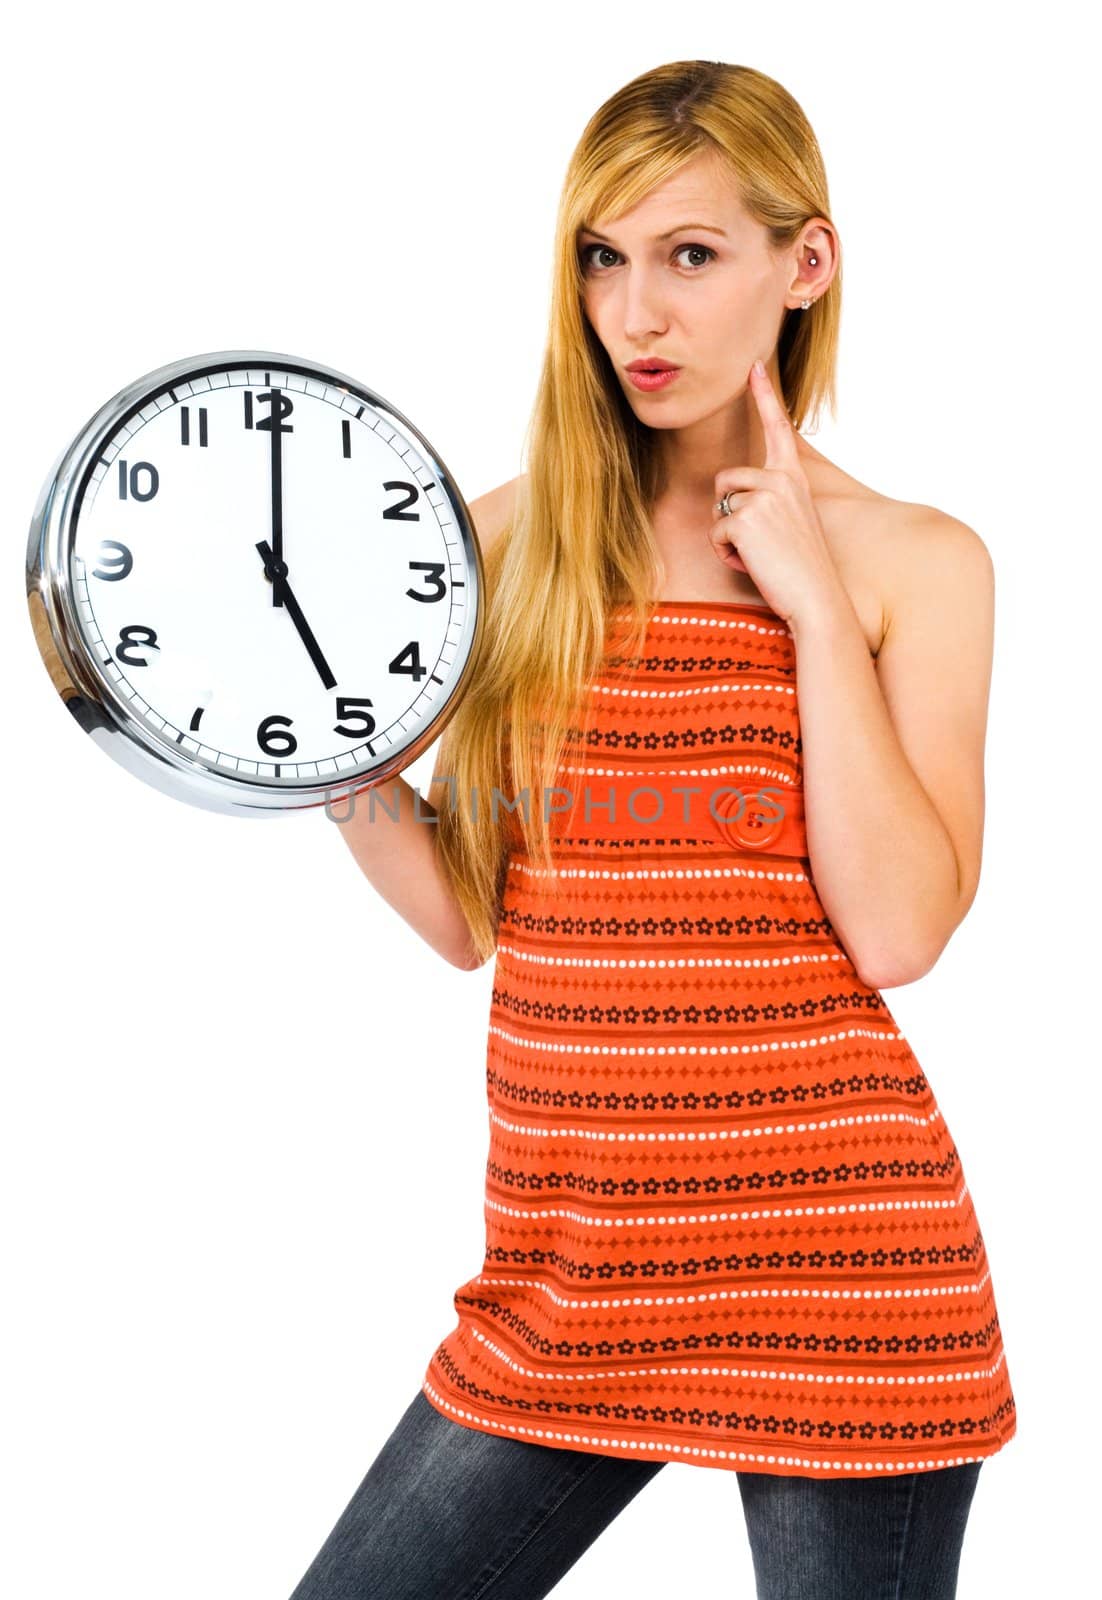 Young woman holding clock  by jackmicro